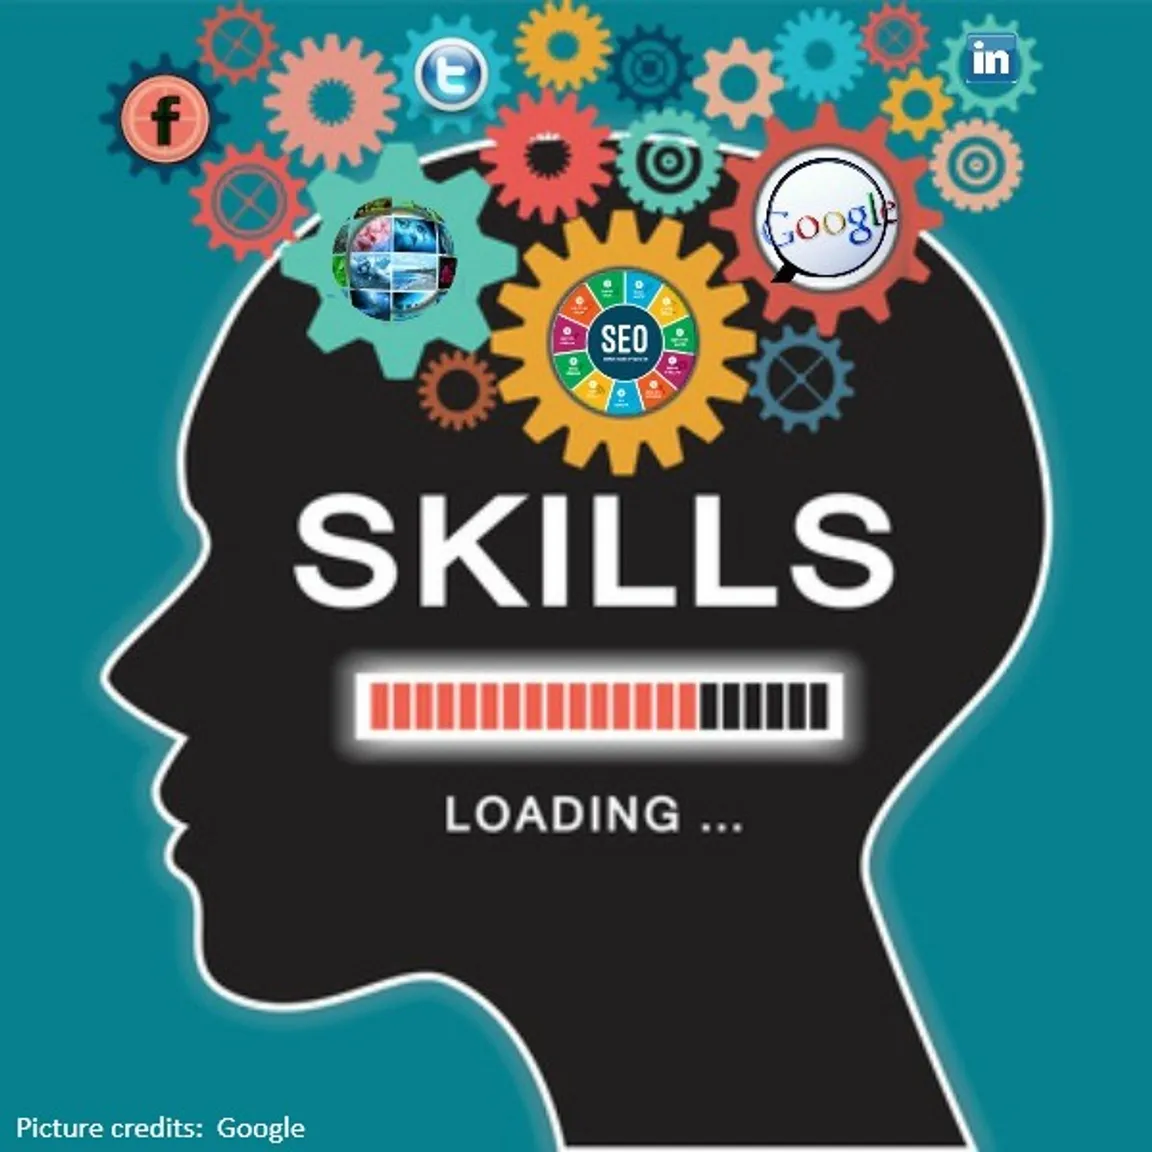 Industry faces challenges galore in improving skills, enhancing employability and building knowledge capital